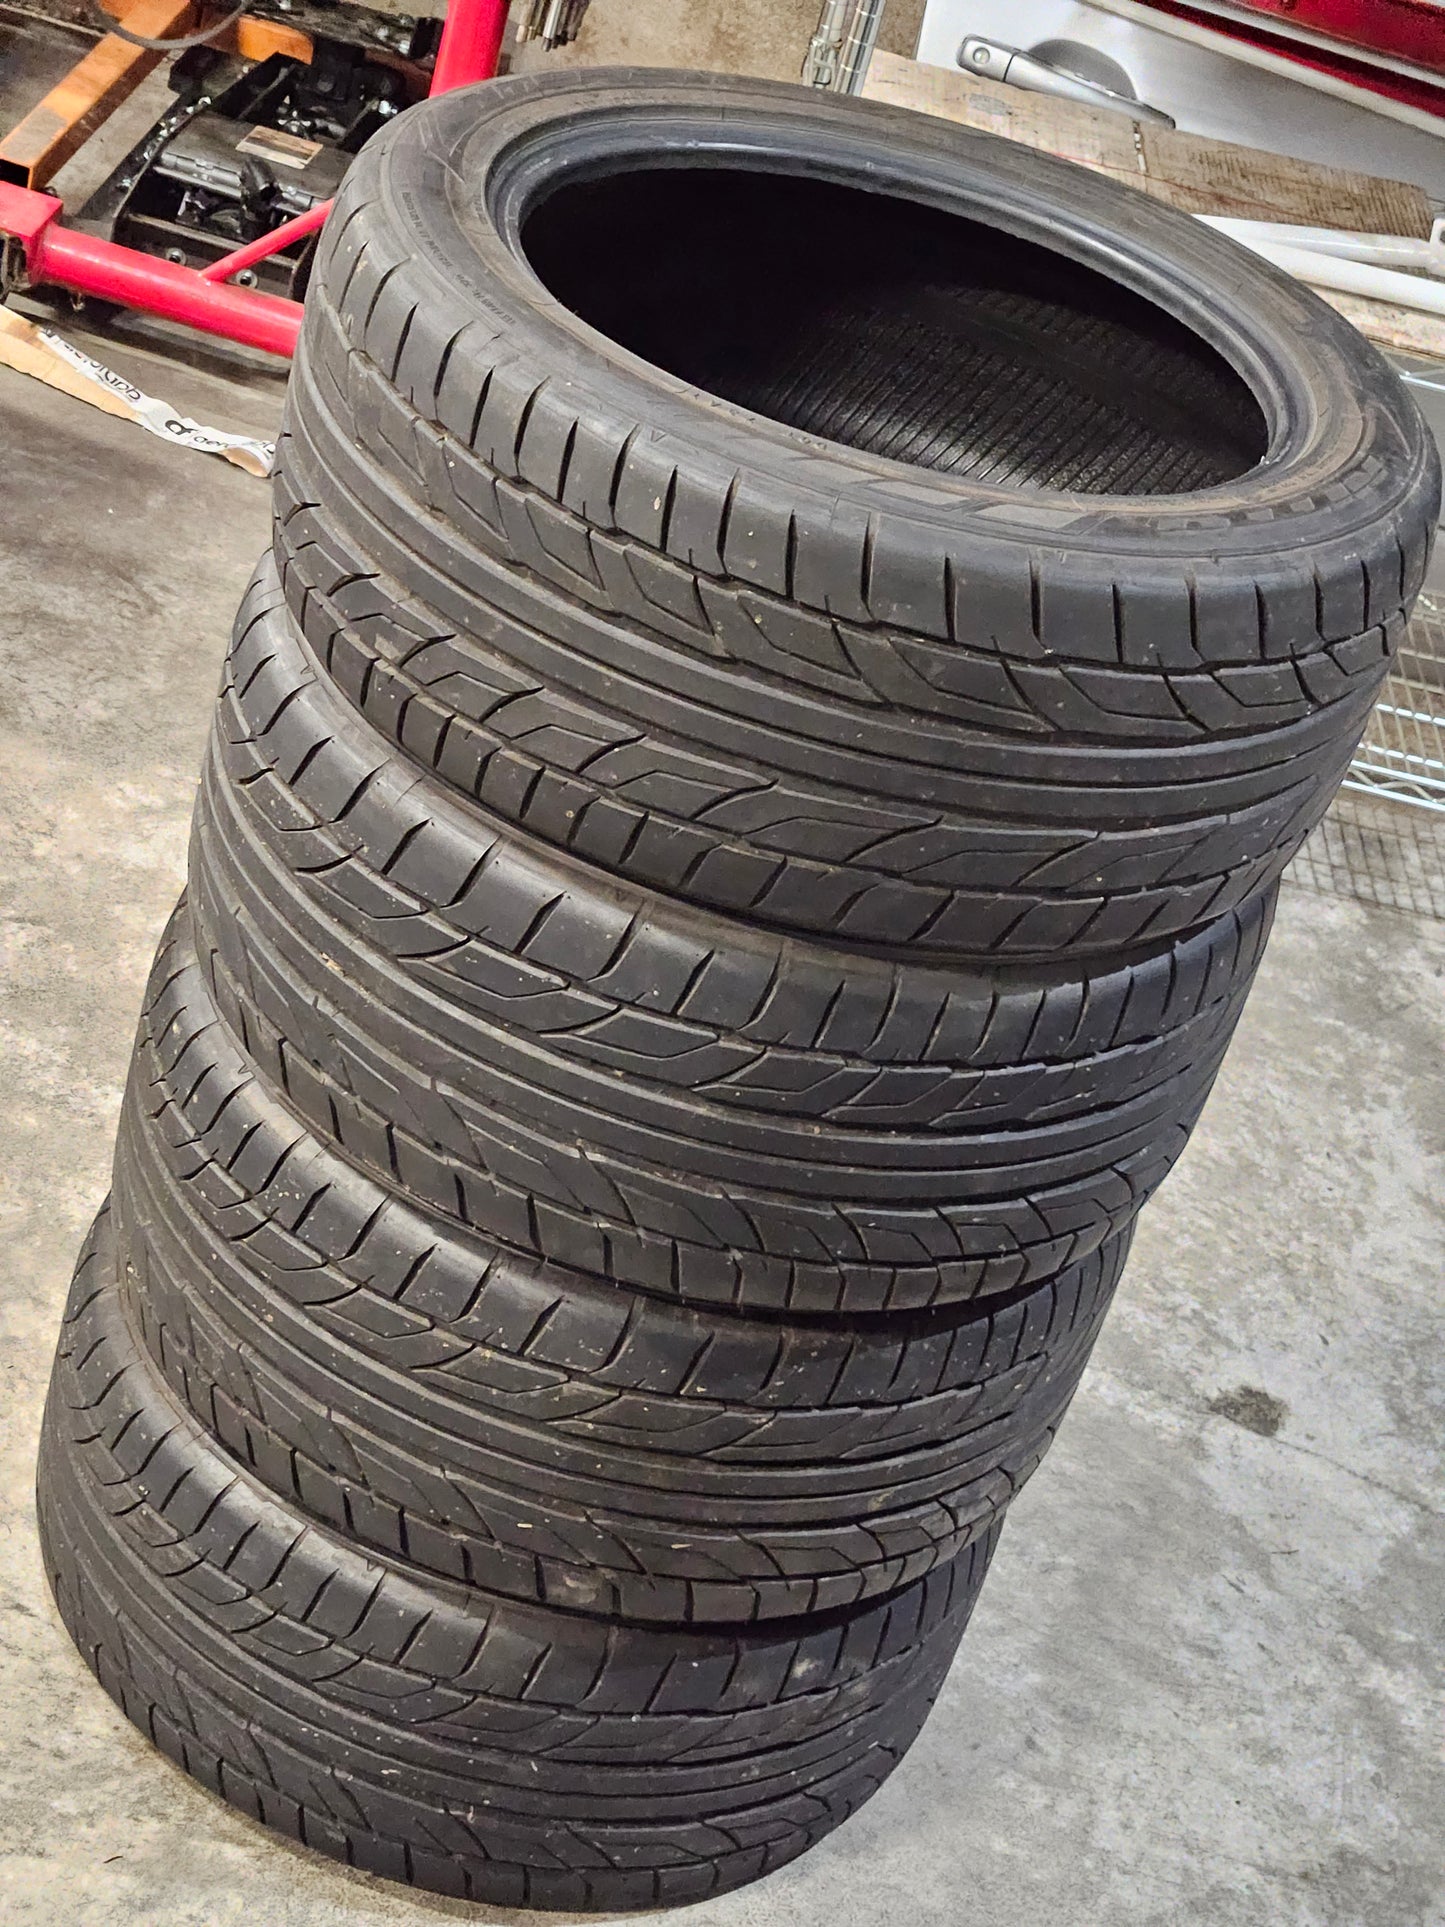 Nitto NT555 G2 245/45r17 Tires